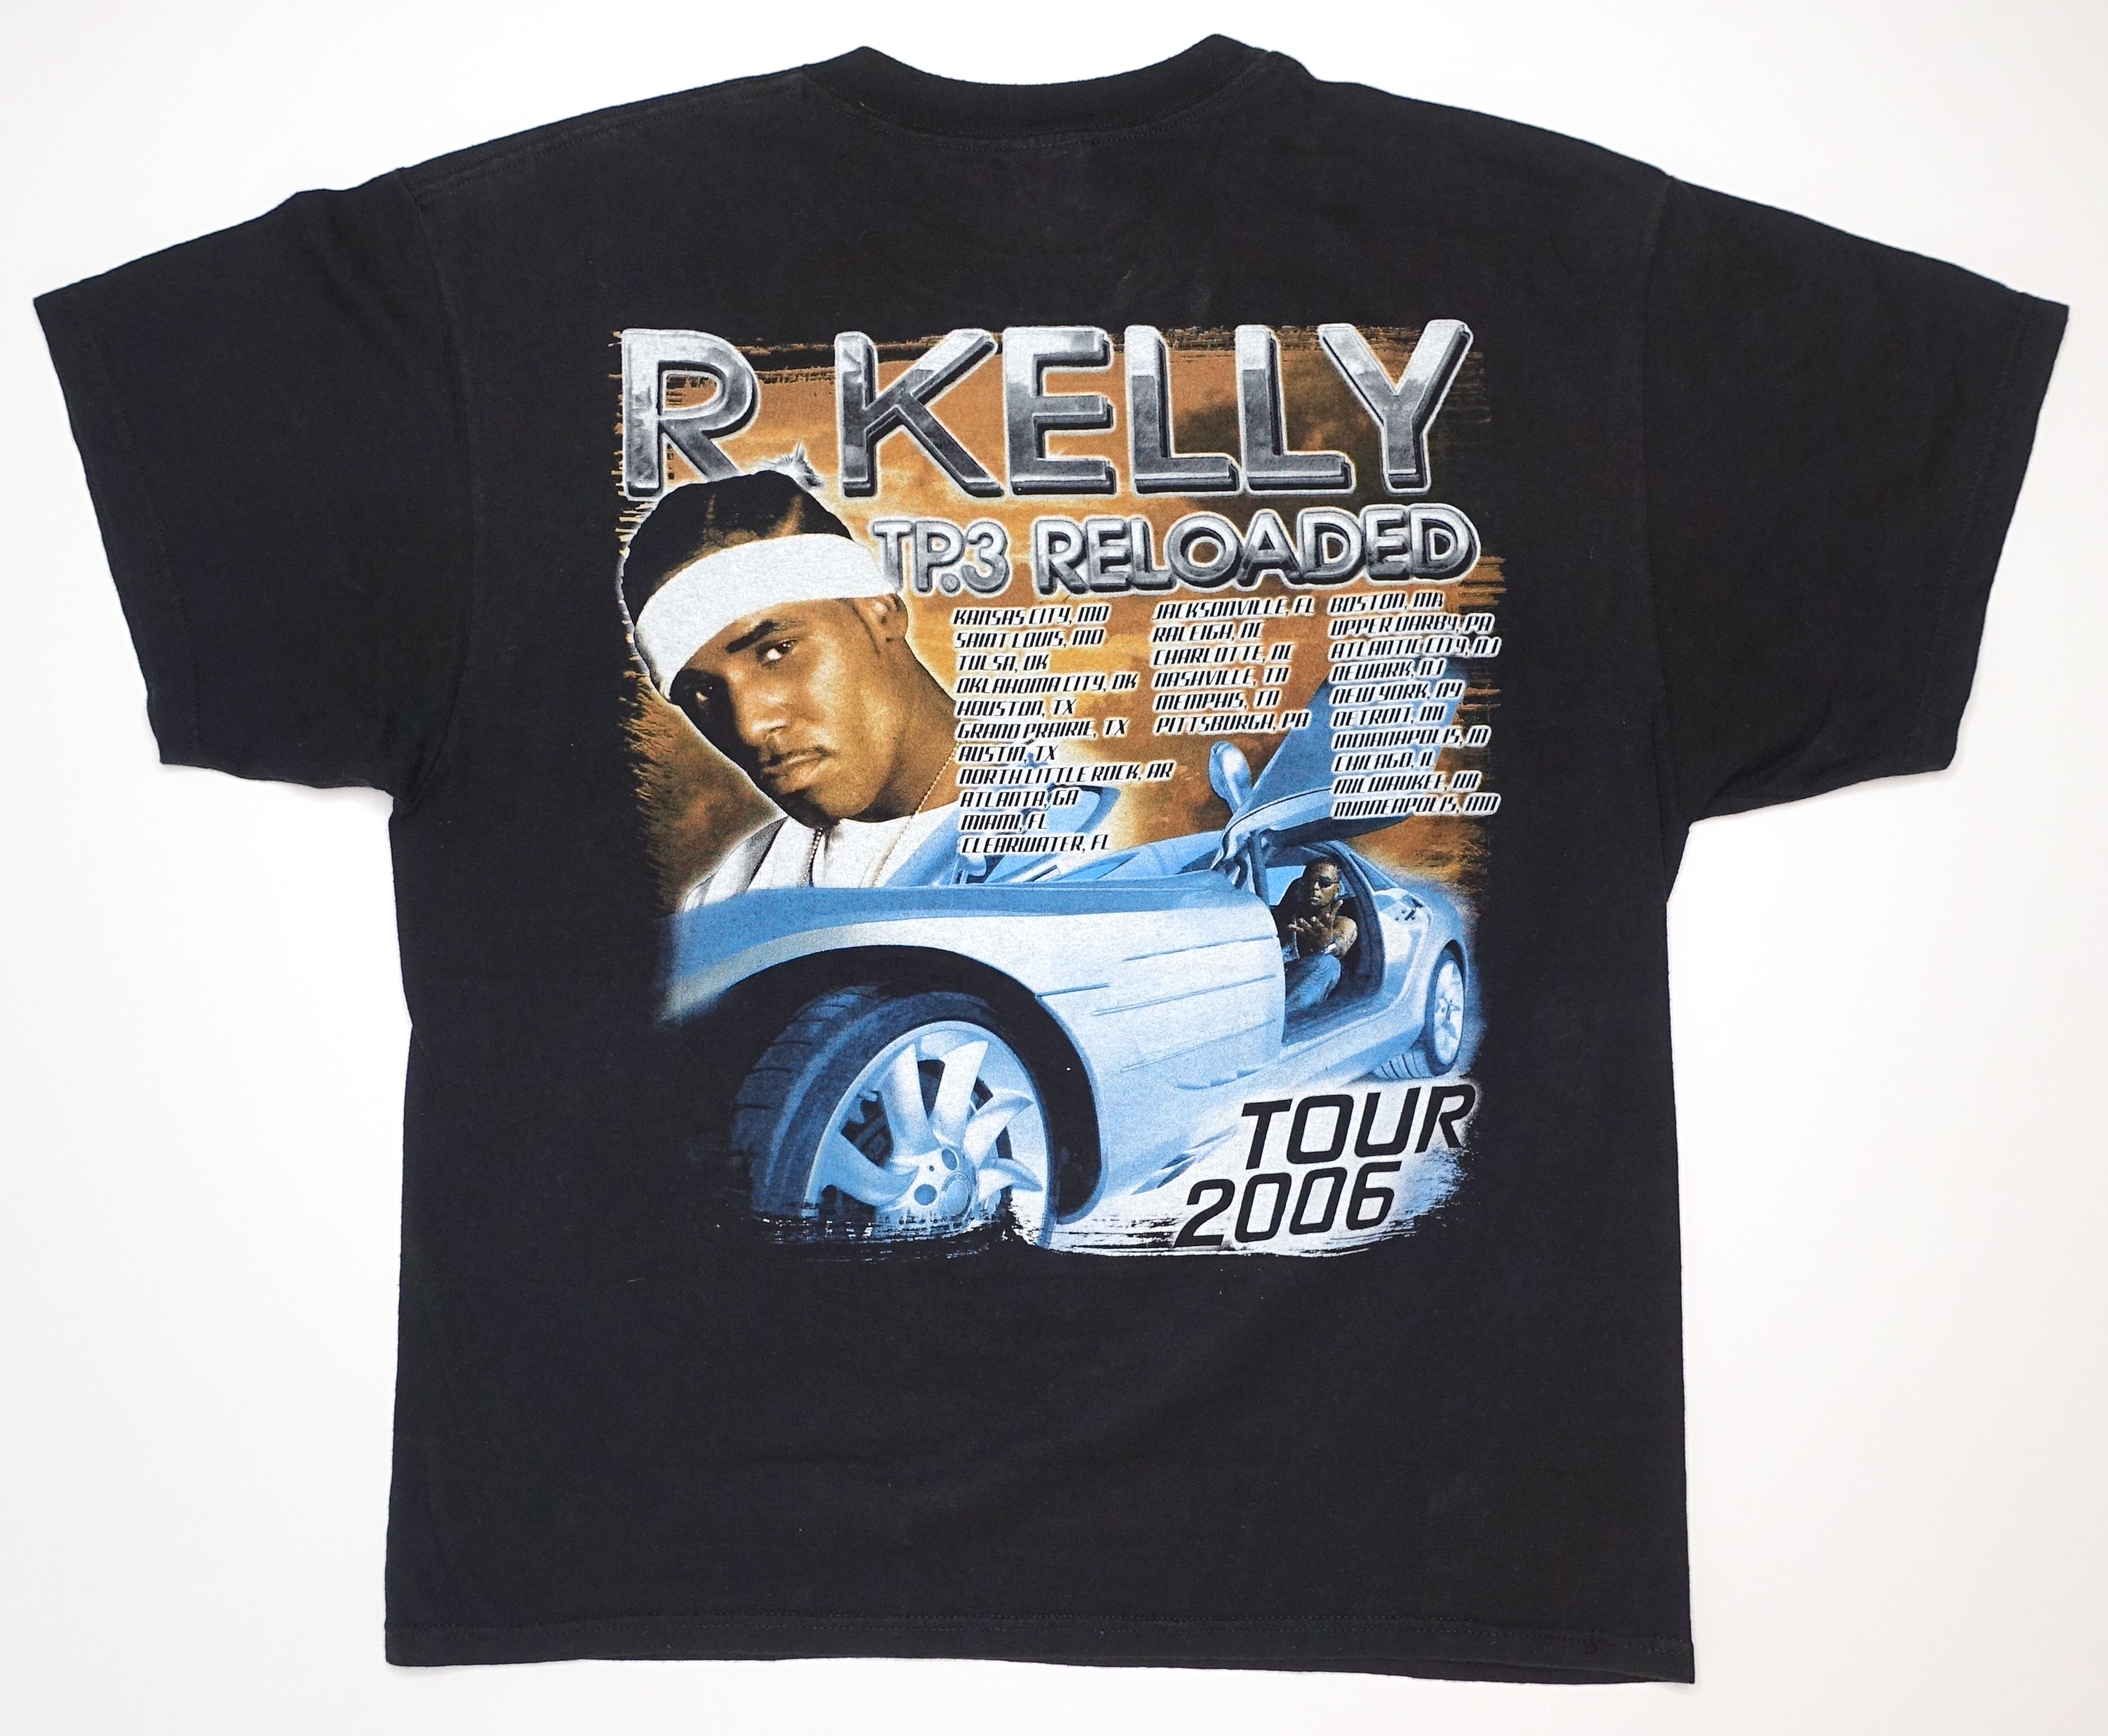 R. Kelly - TP.3 Reloaded  2006 Tour Shirt Size Large